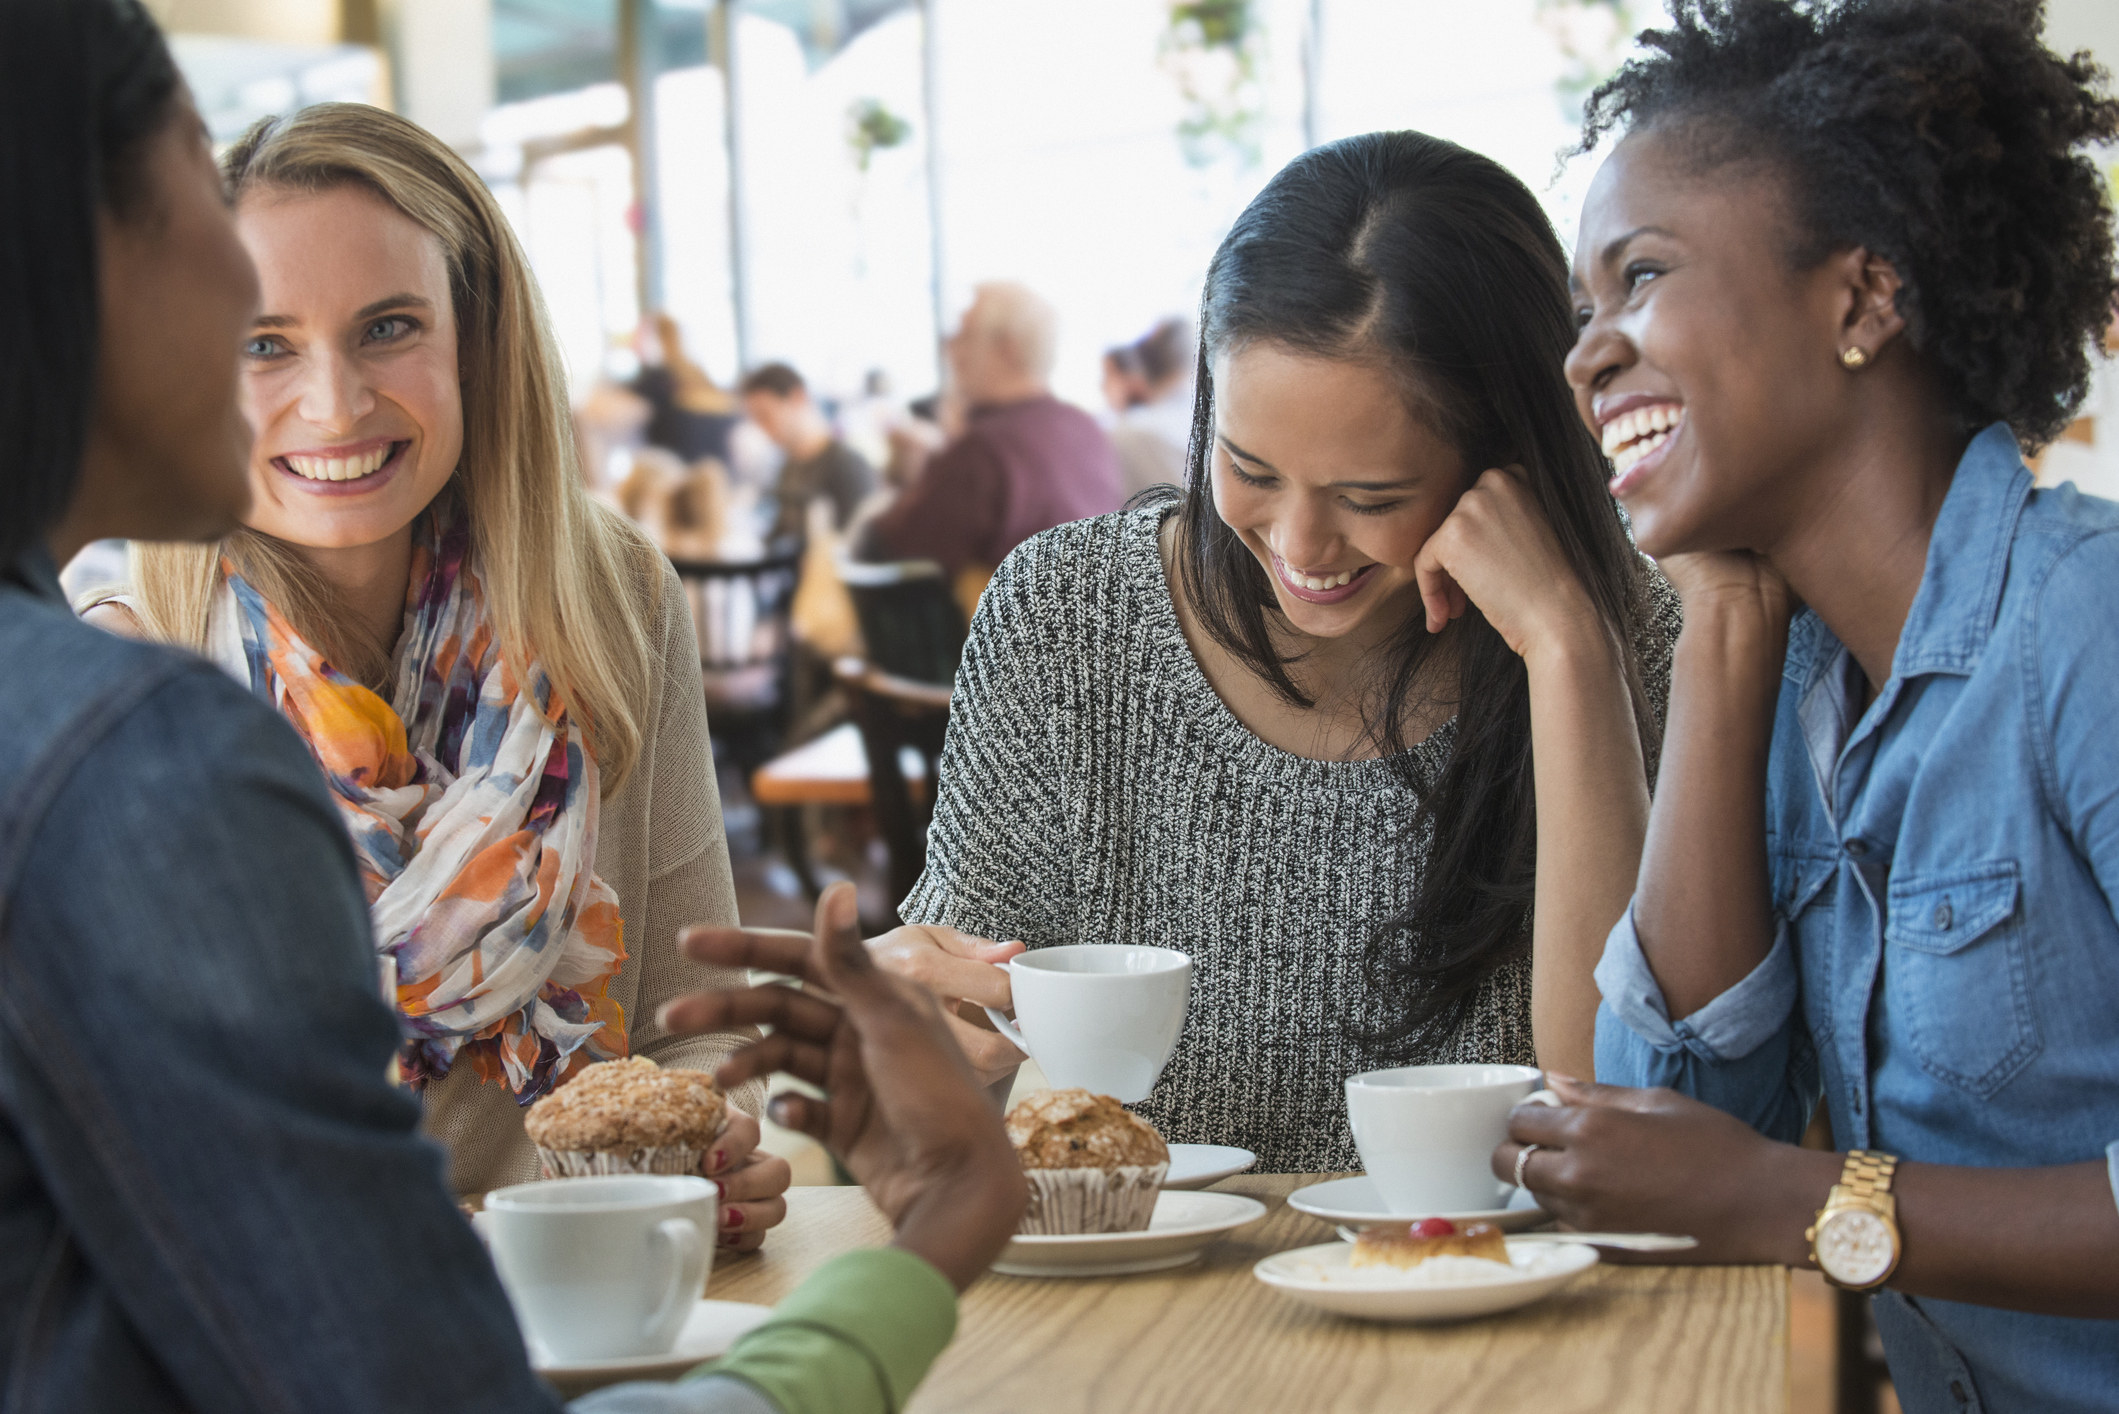 Four women having coffee together and laughing